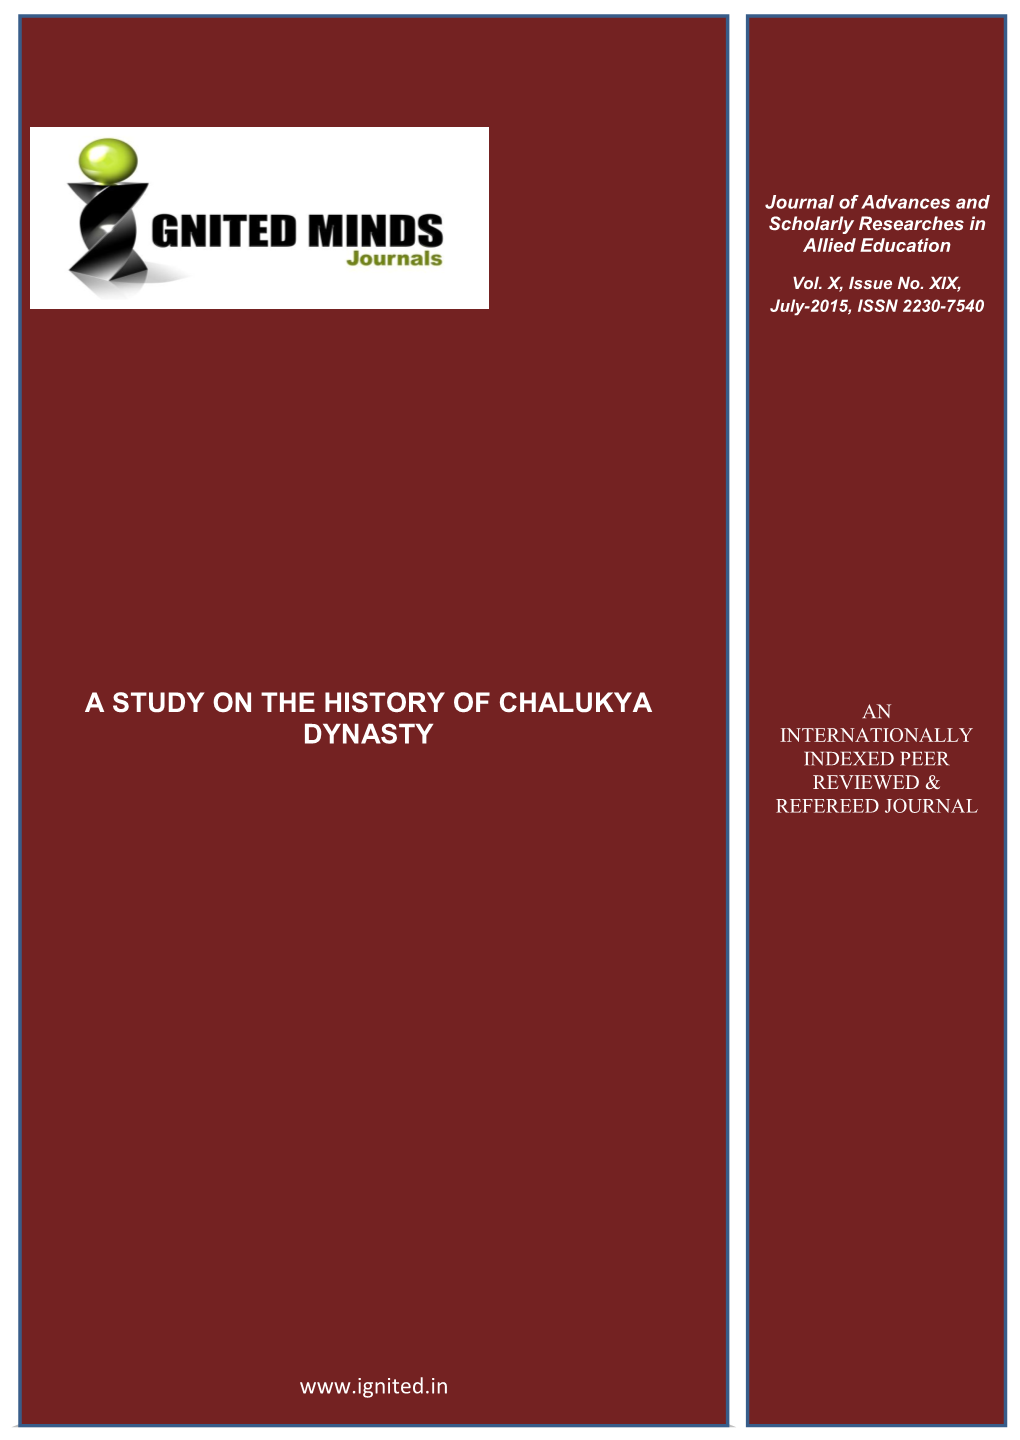 A Study on the History of Chalukya Dynasty